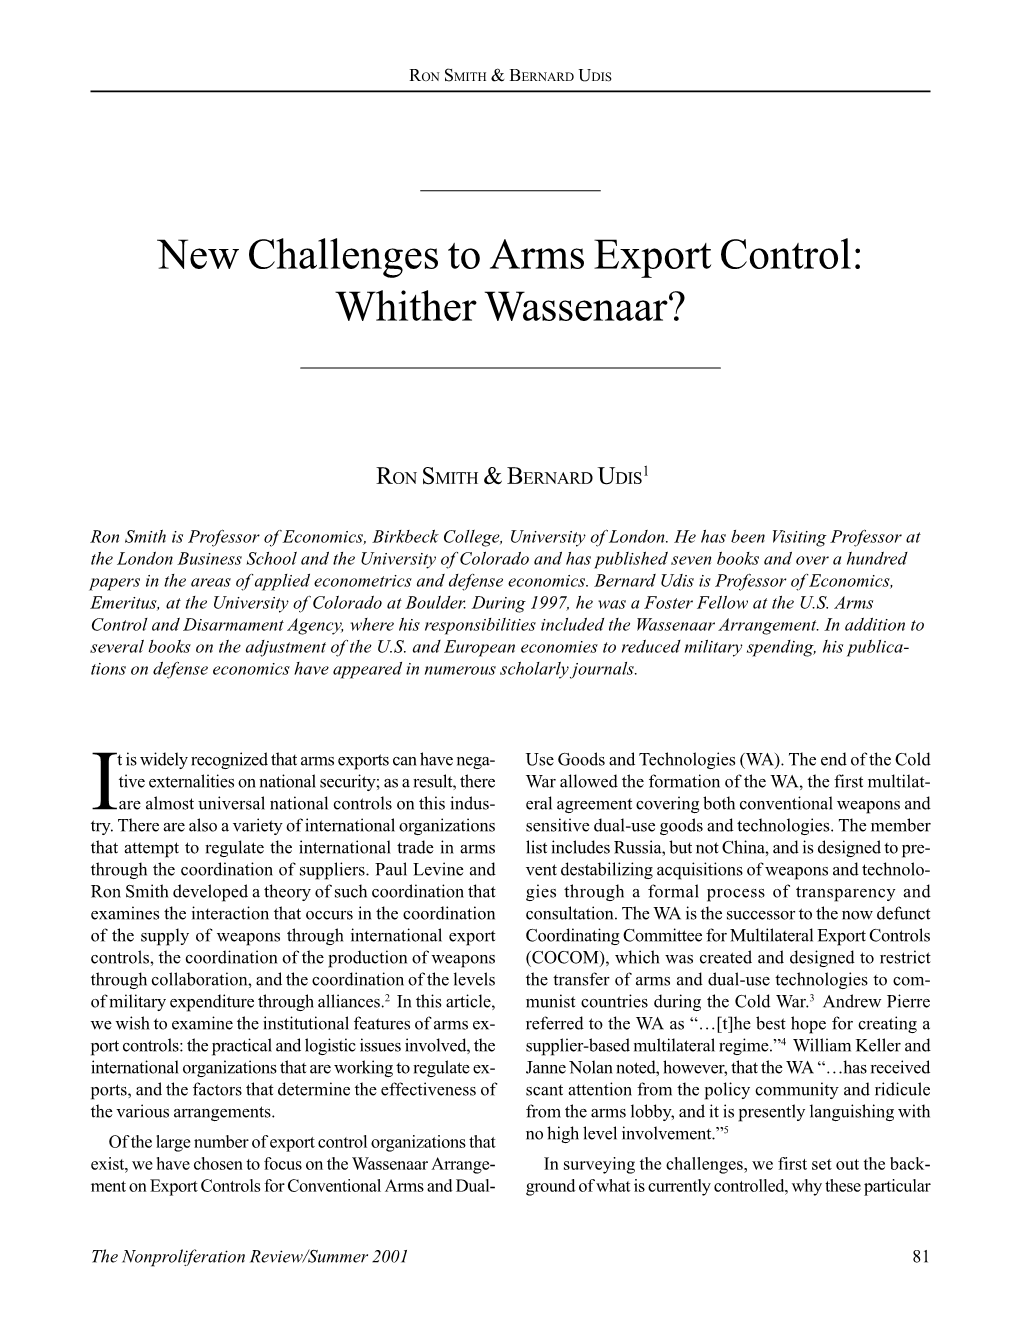 New Challenges to Arms Export Control: Whither Wassenaar?